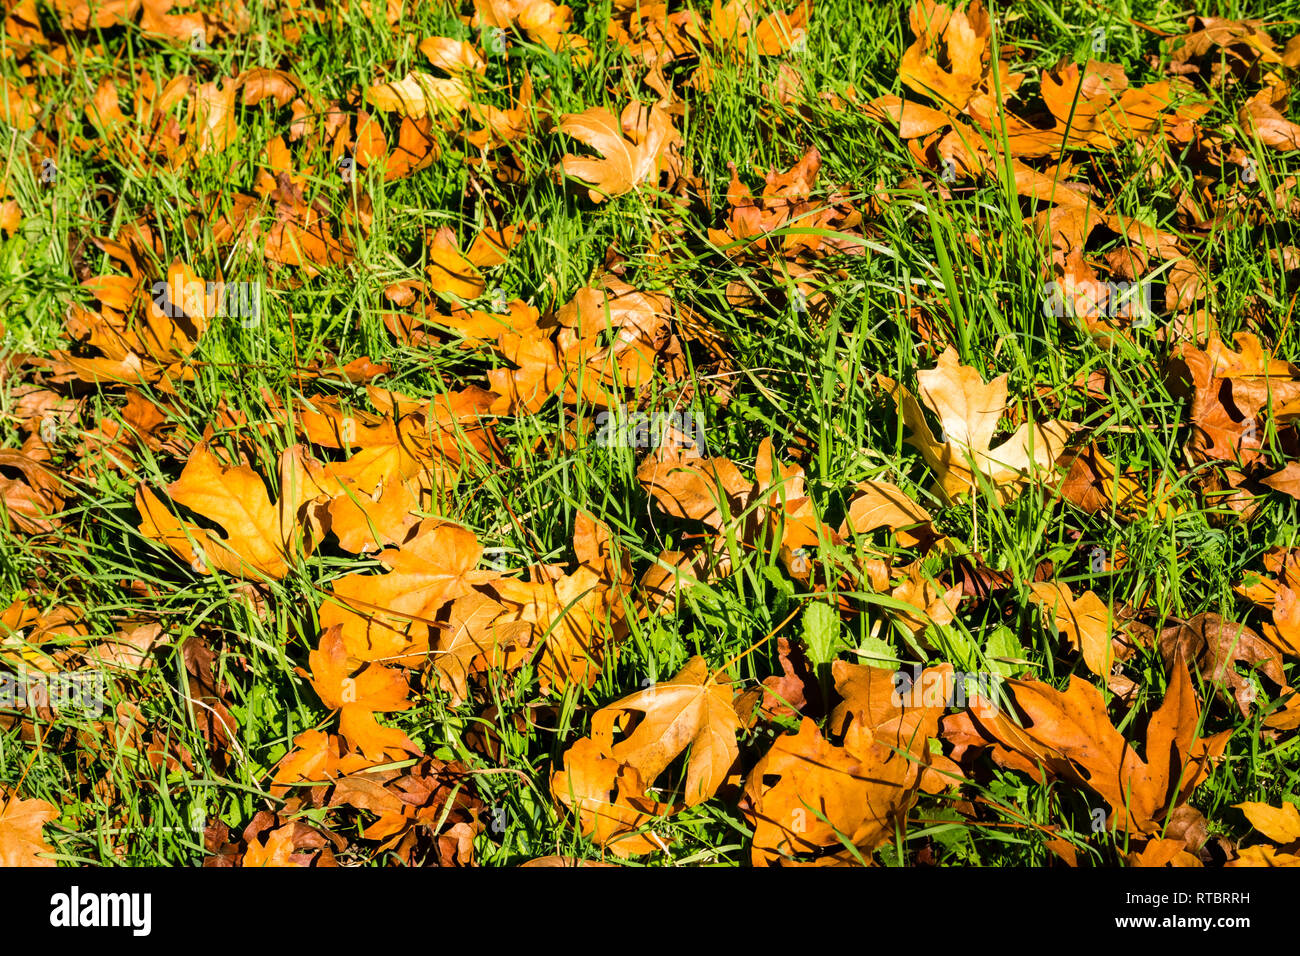 Large fallen Western Sycamore tree (Platanus racemosa) leaves on new grass meadow in autumn, California Stock Photo